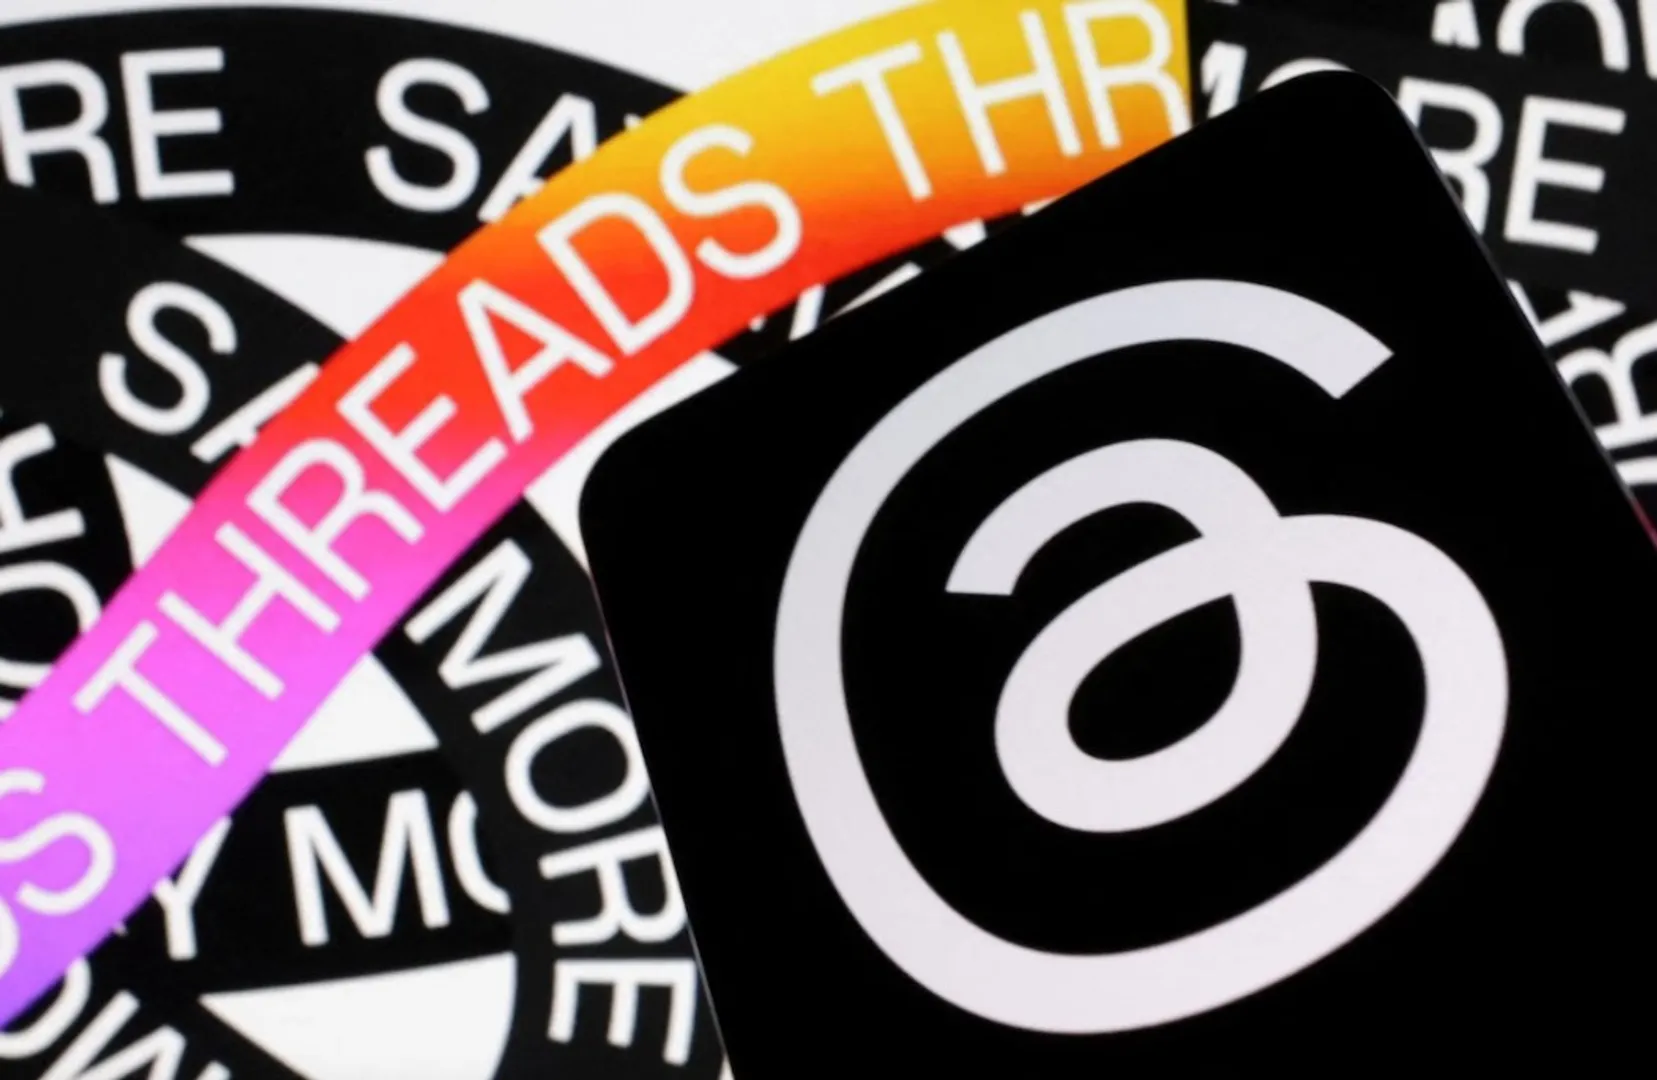 Traffic on Meta’s Threads is declining as company adds features https://www.washingtonpost.com/technology/2023/08/22/meta-threads-desktop/ - Meta announced a desktop version of Threads, part of a slew of options Meta has added to the text-based social media platform

#Threads  #Instagram  #Meta  #SocialMedia  #Consumers  